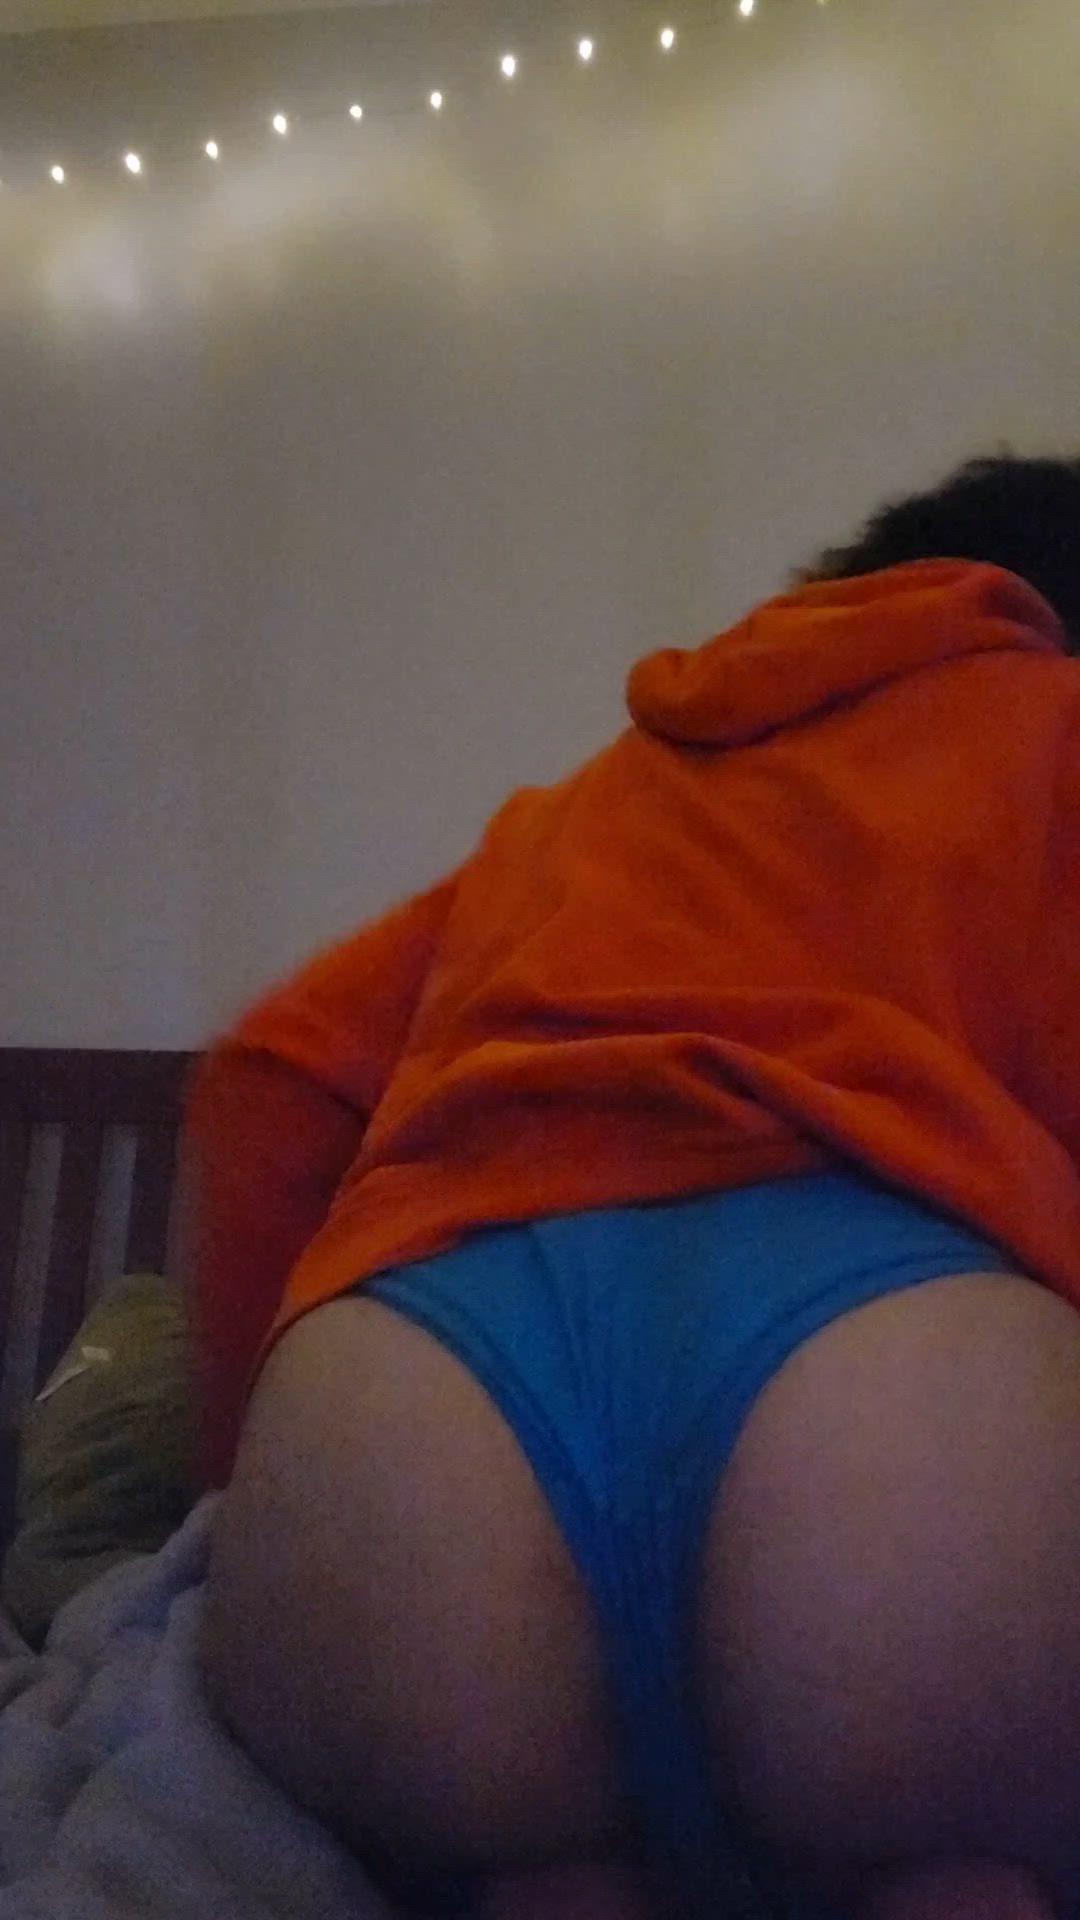 Ass porn video with onlyfans model eros <strong>@erosftm</strong>